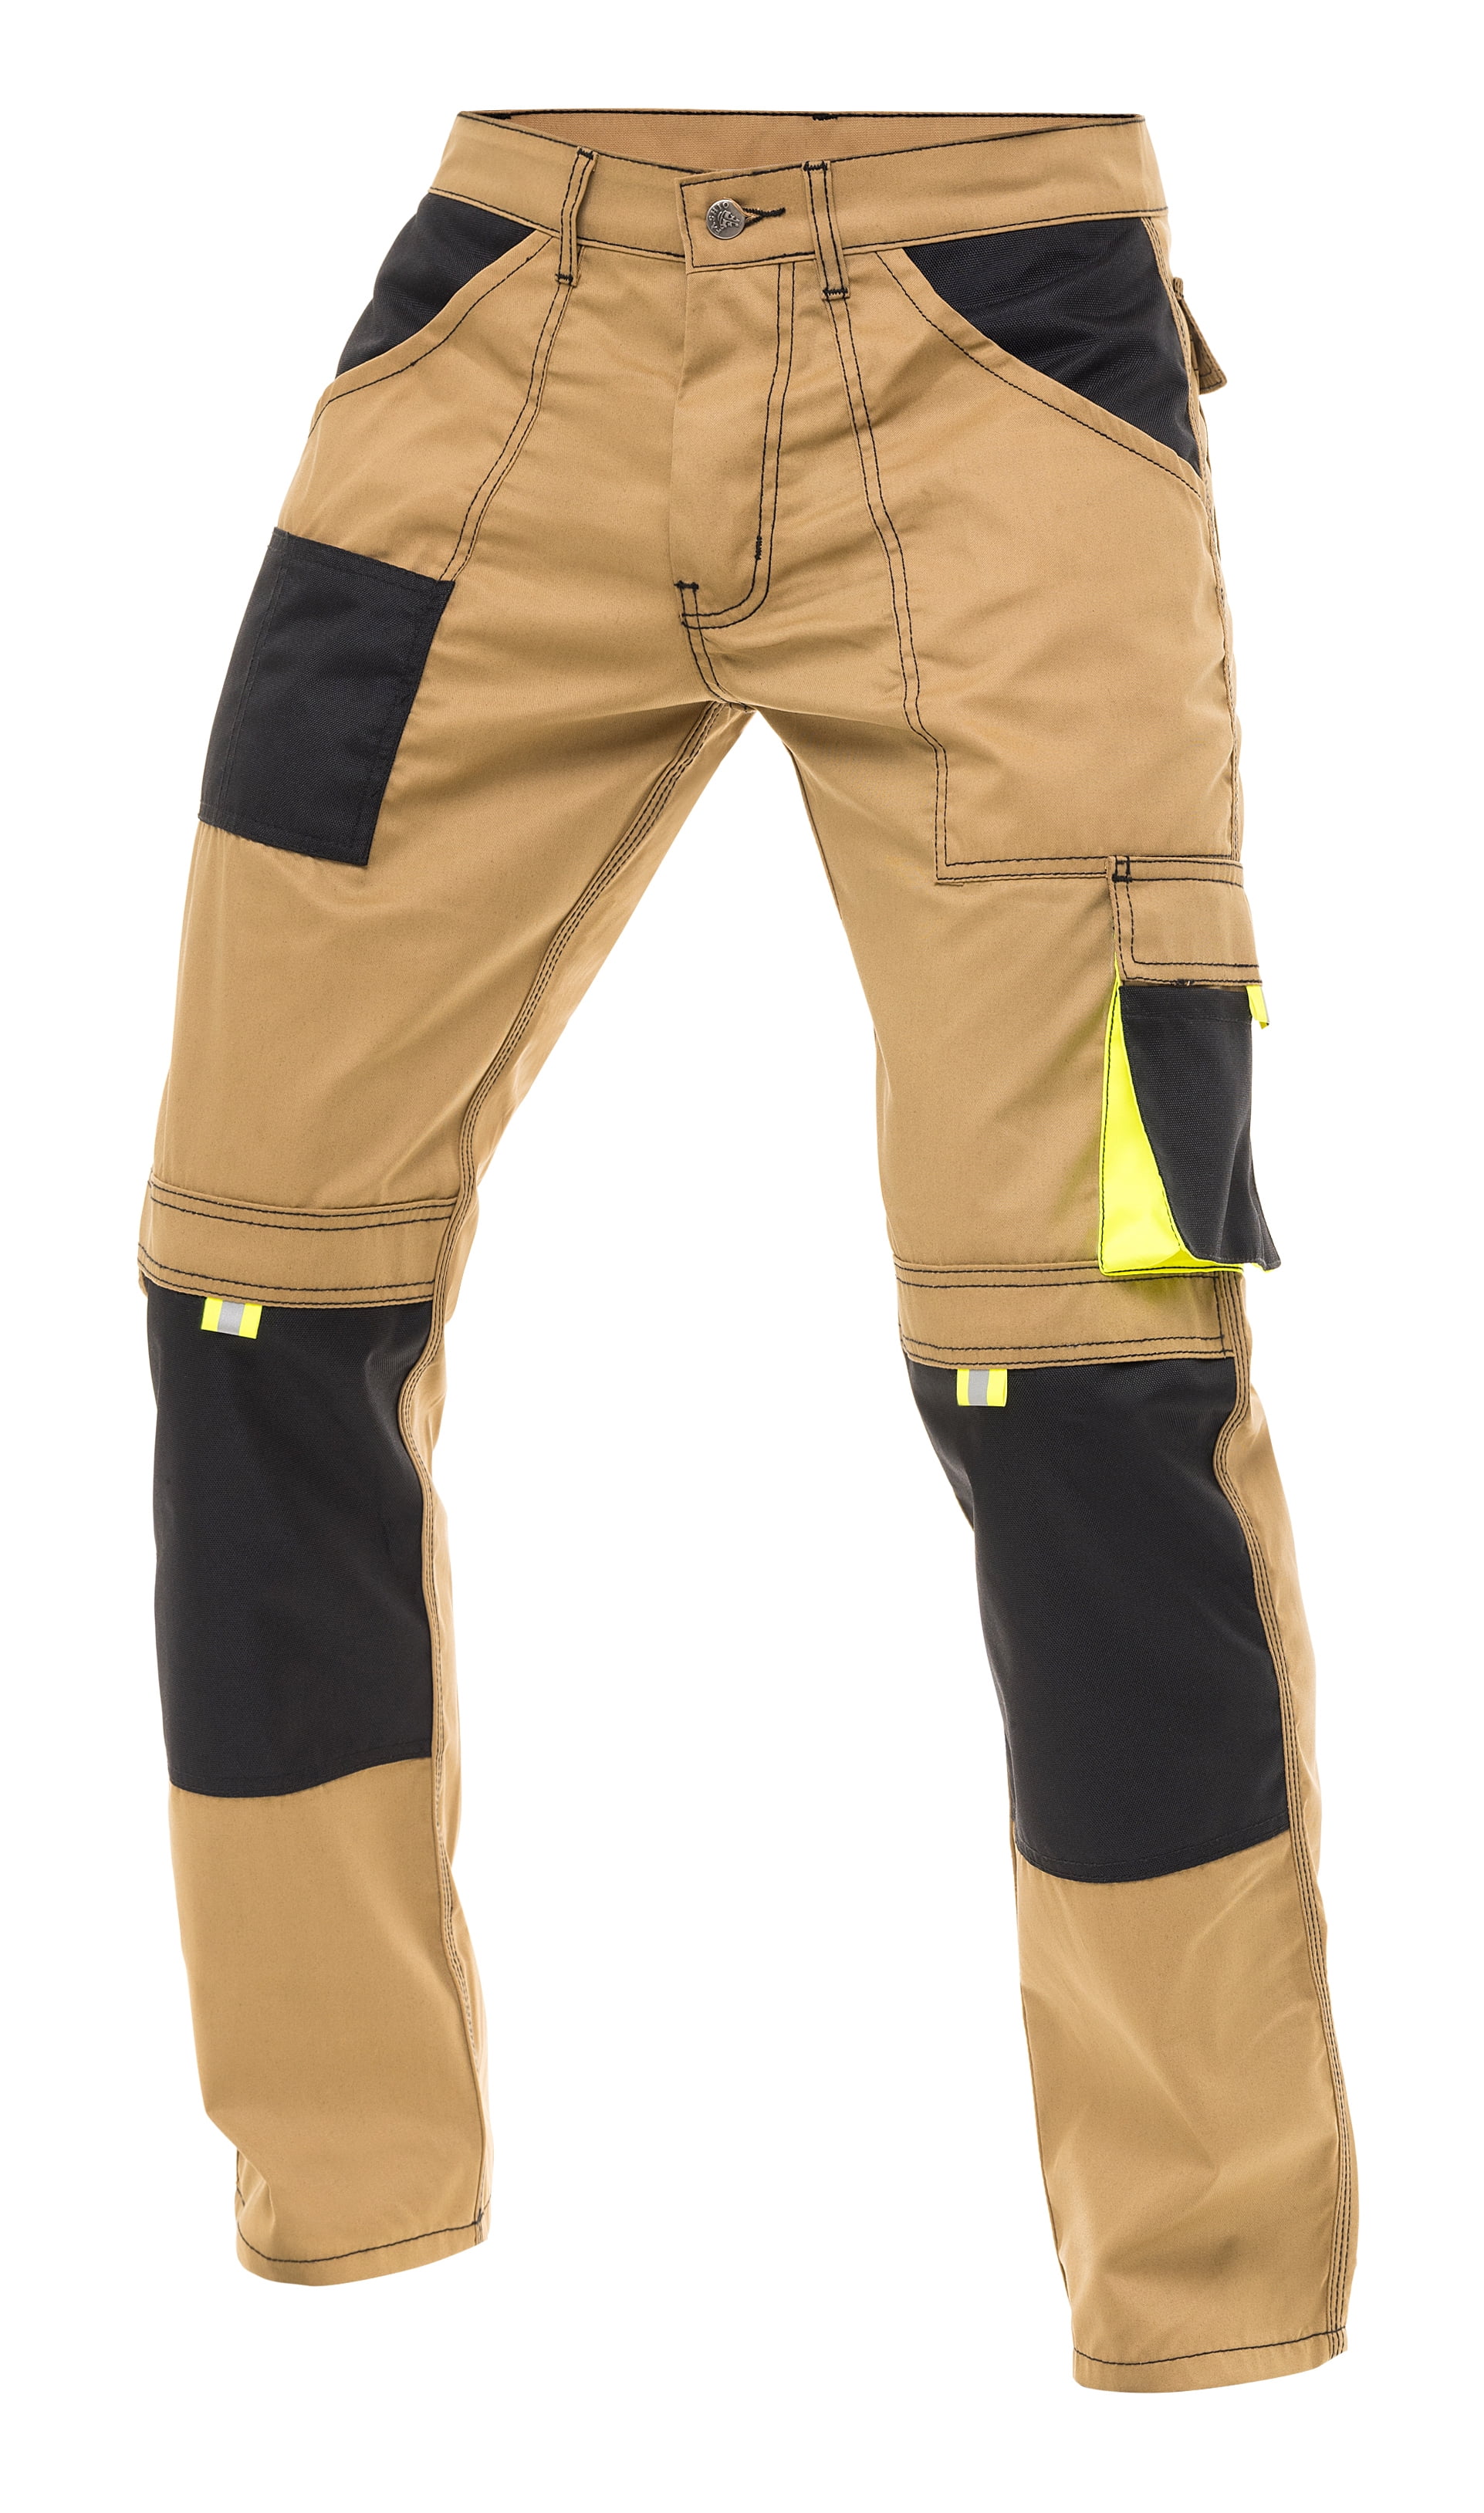 Skylinewears Men Construction Pants Utility Work Trousers With Built In ...